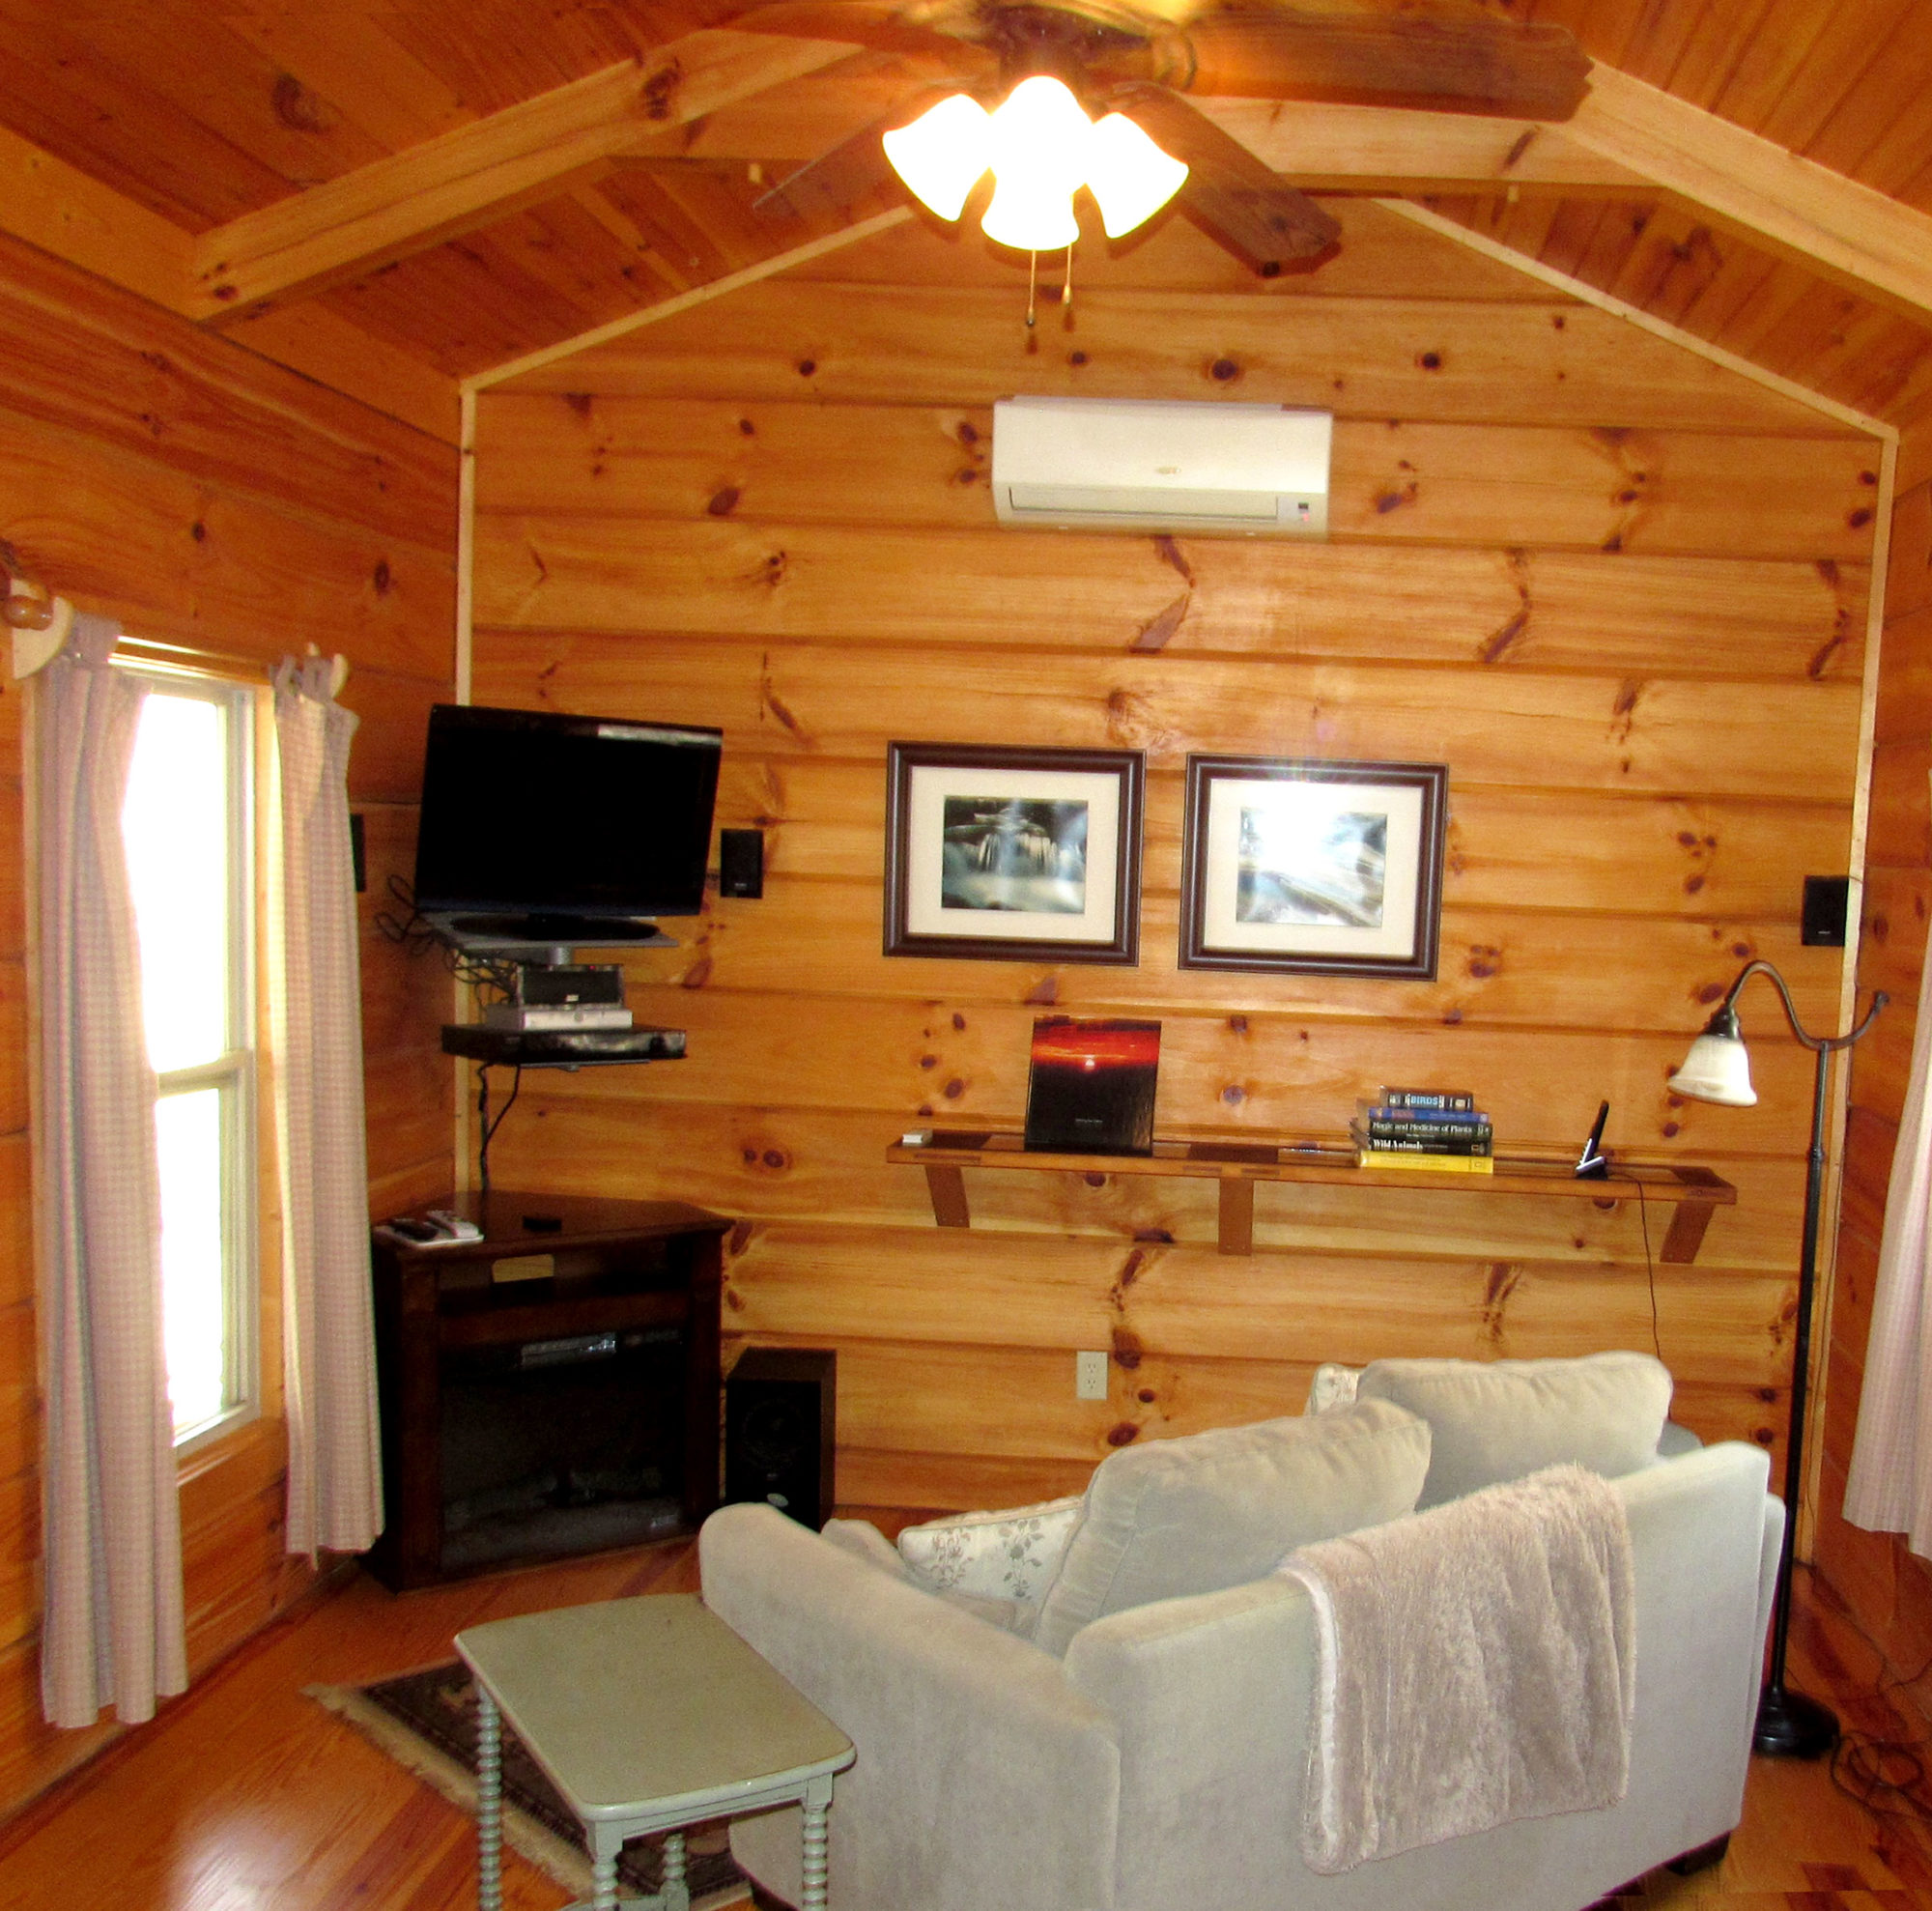 Retreat to this cozy cabin with the one you love